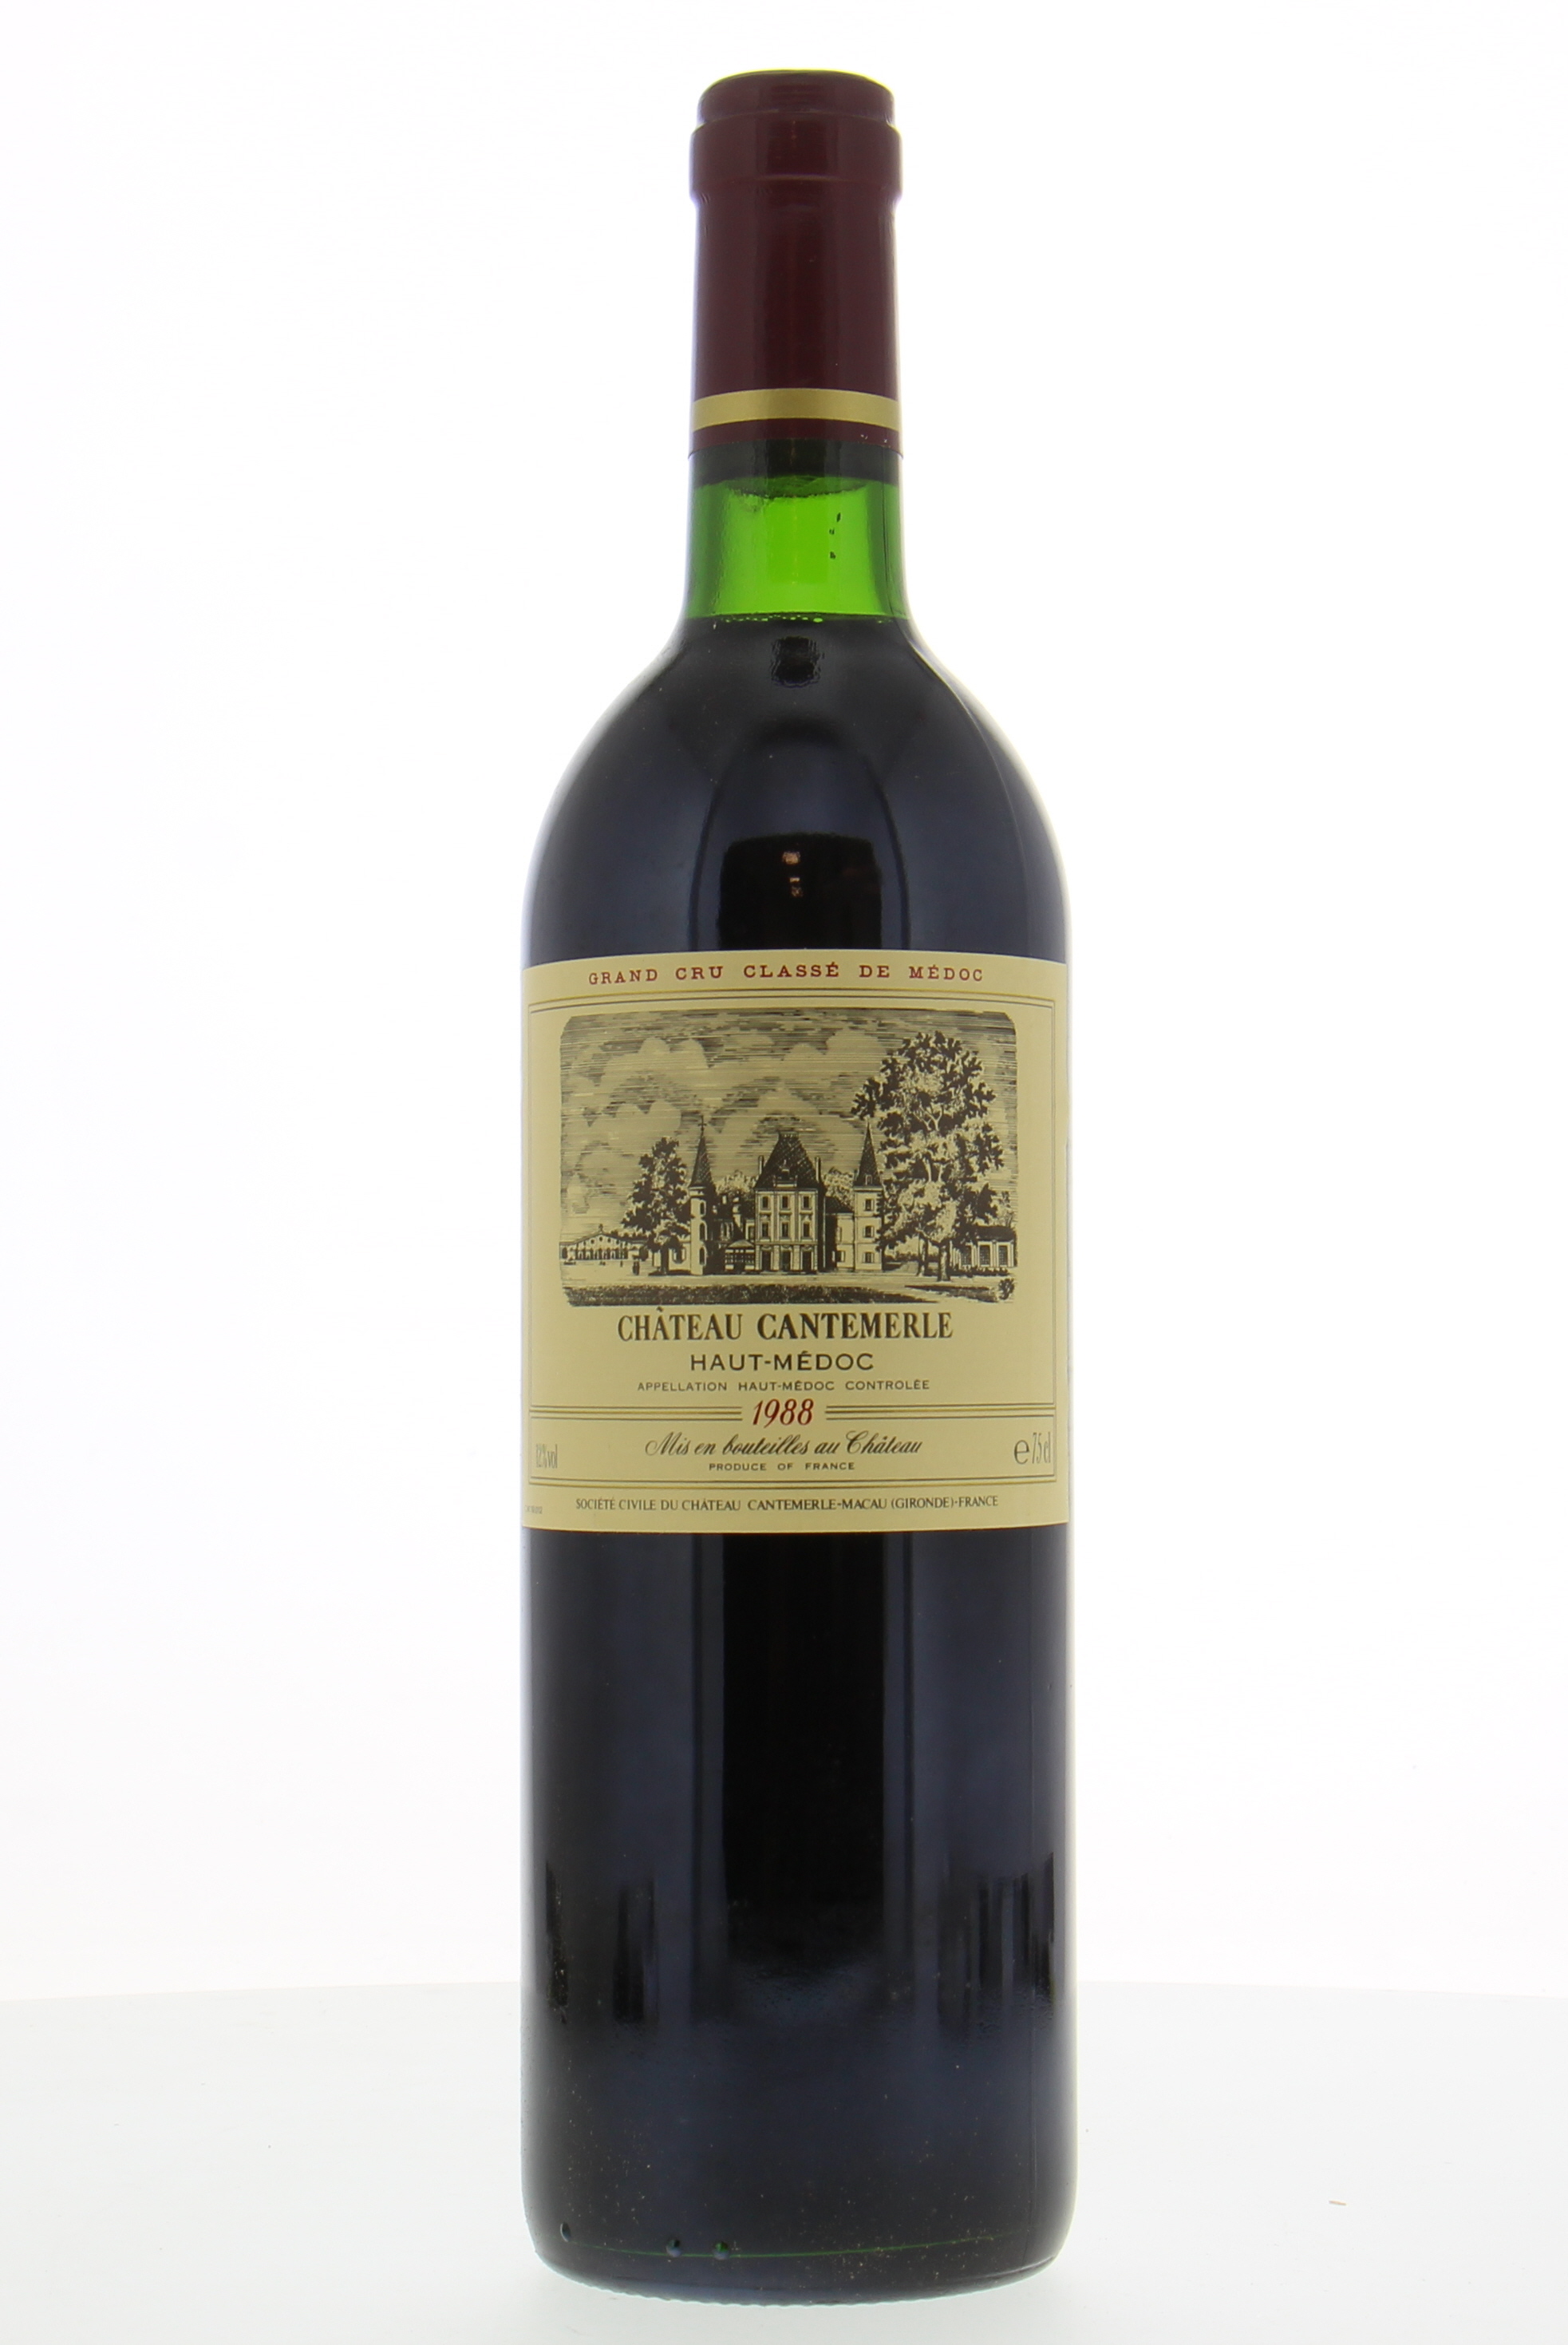 Chateau Cantemerle - Chateau Cantemerle 1988 Top Shoulder or better